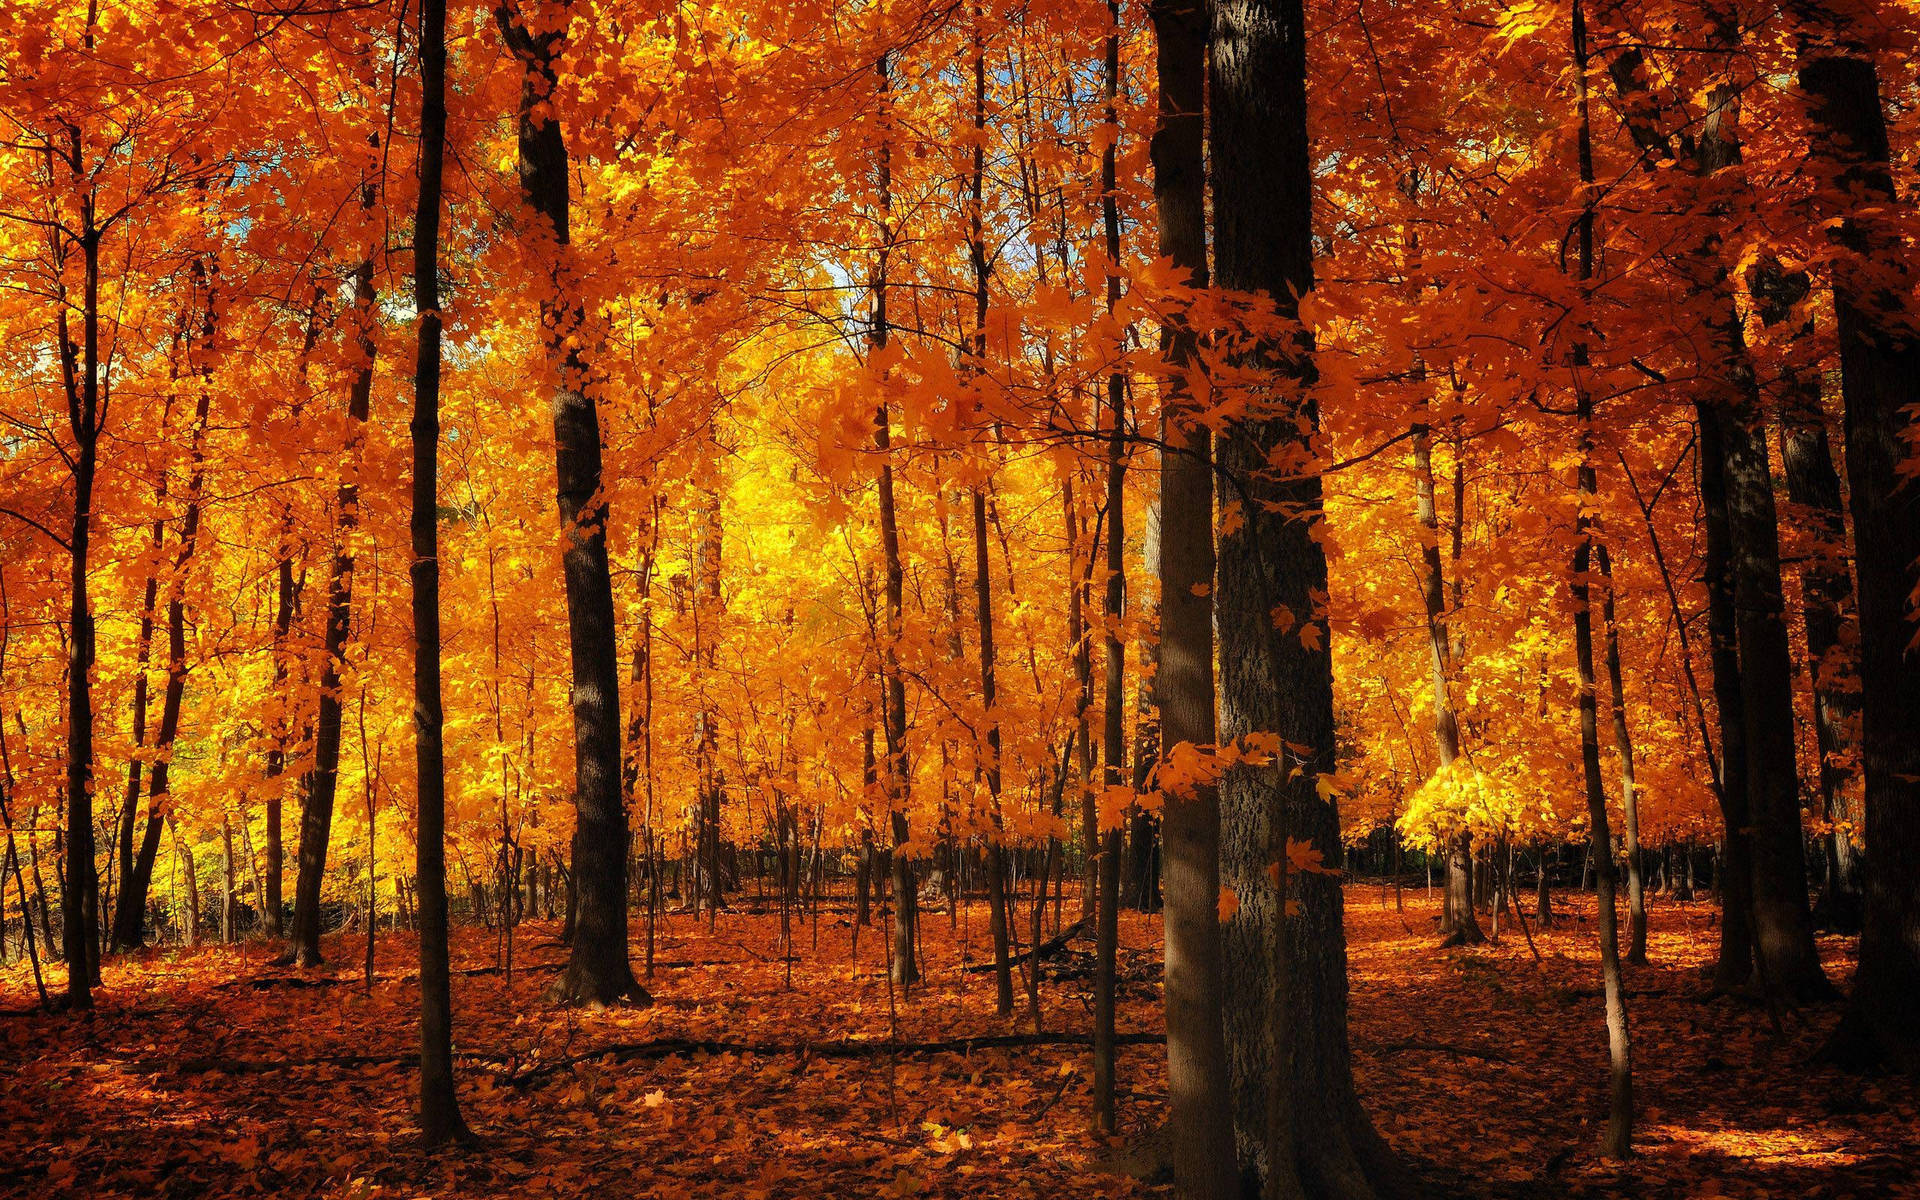 Cute Fall Aesthetic Photograph Of Forest Wallpaper